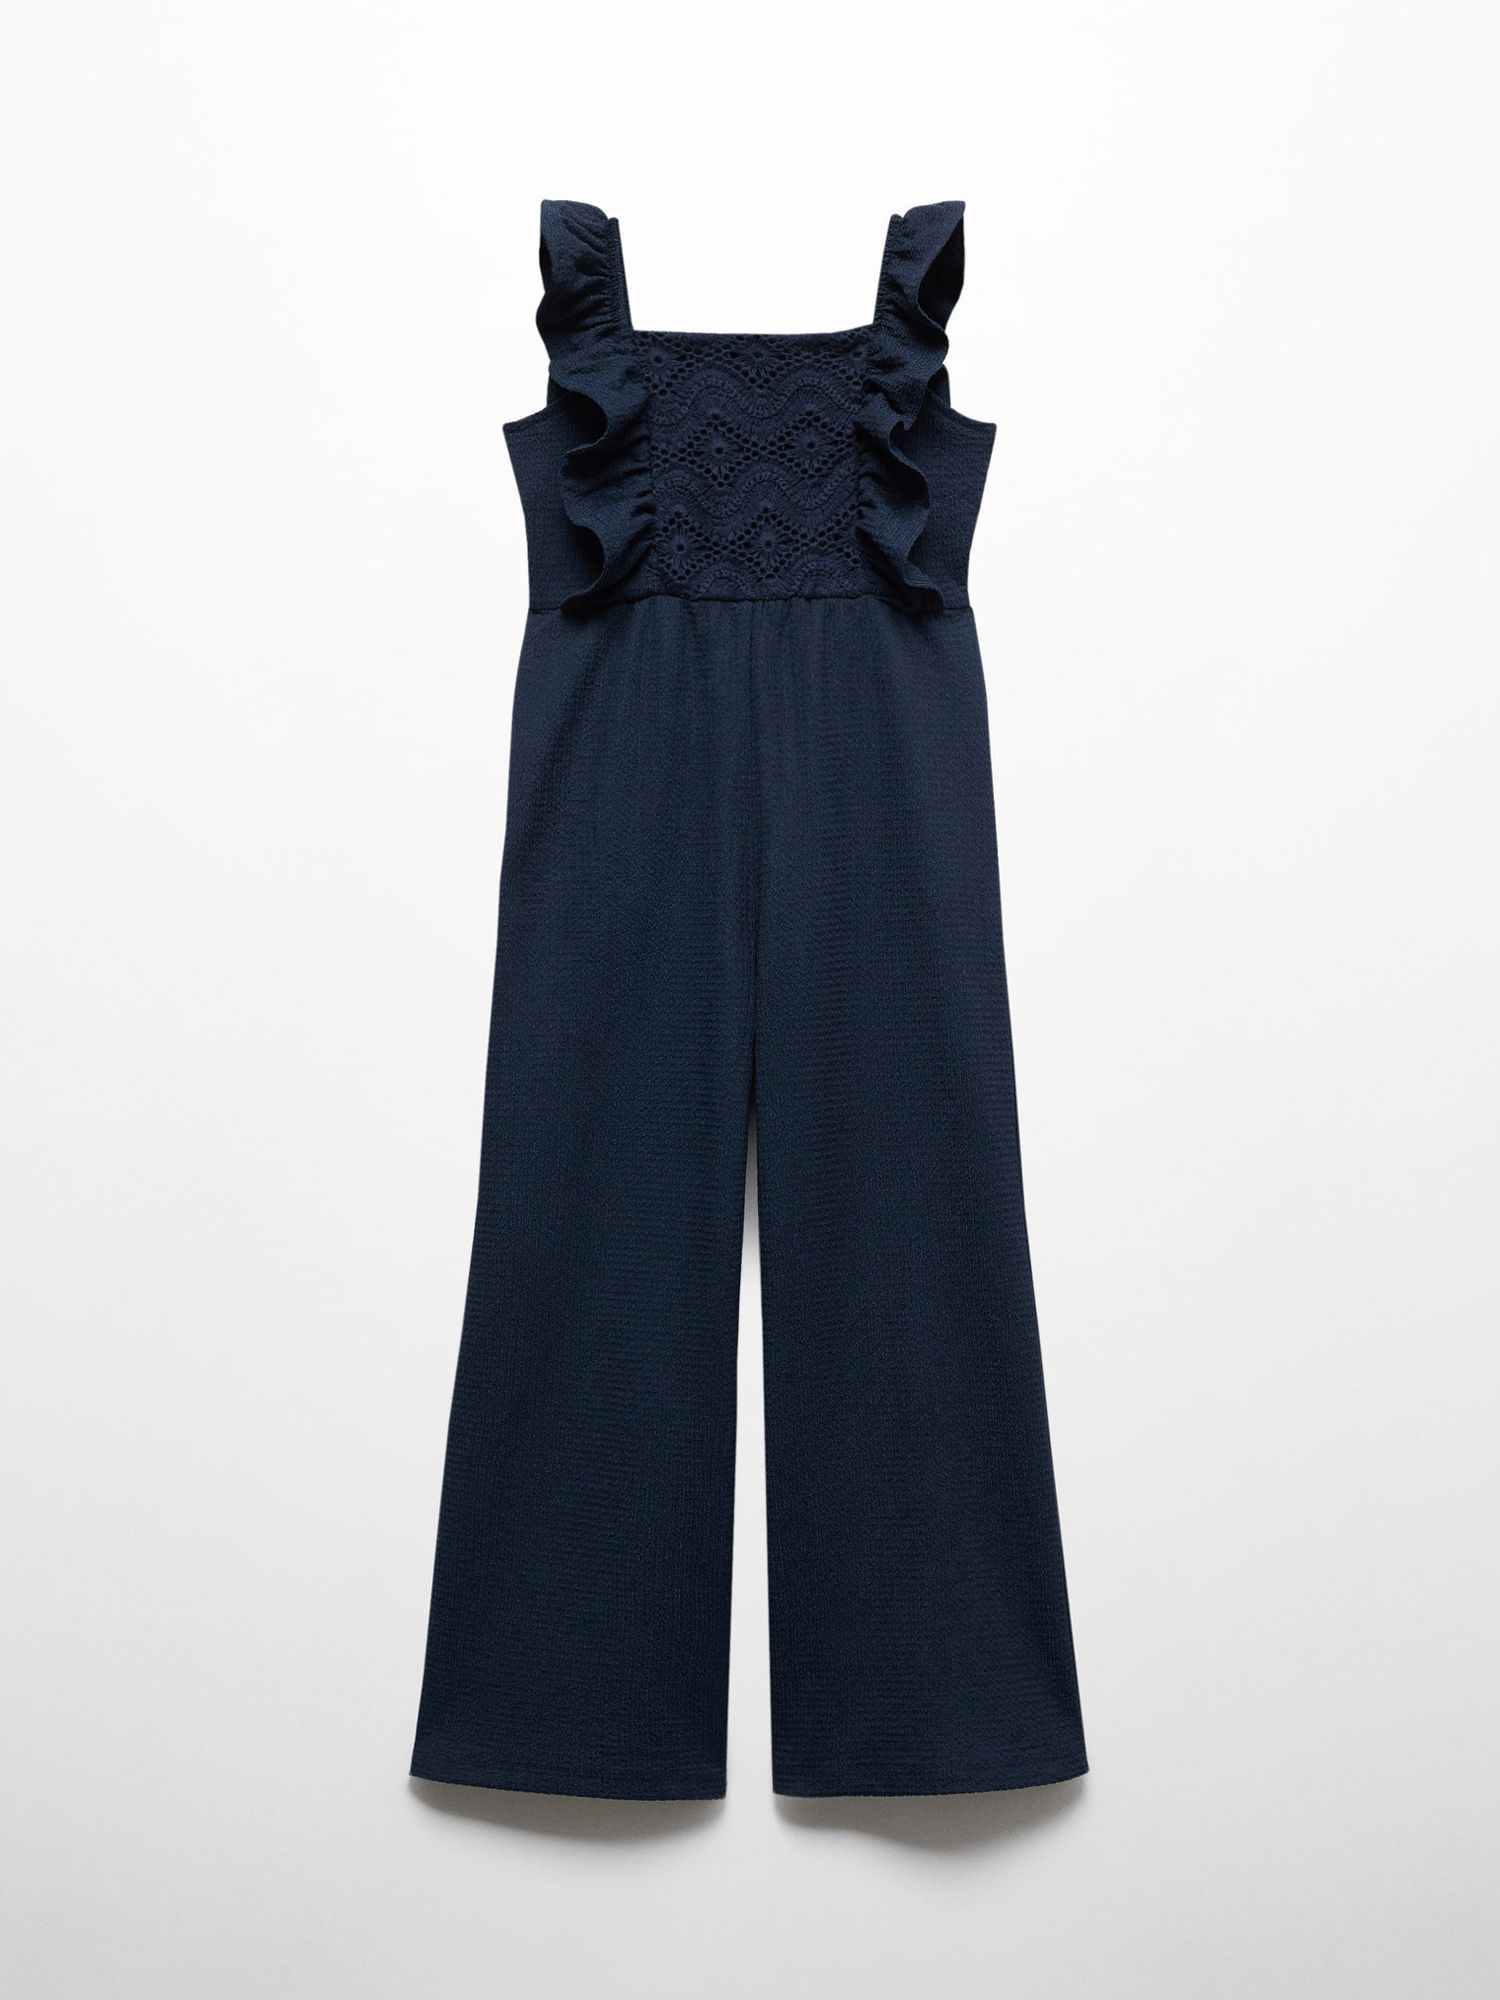 Mango Kids' Crochi Embroidered Bodice Frill Jumpsuit, Navy, 11-12 years